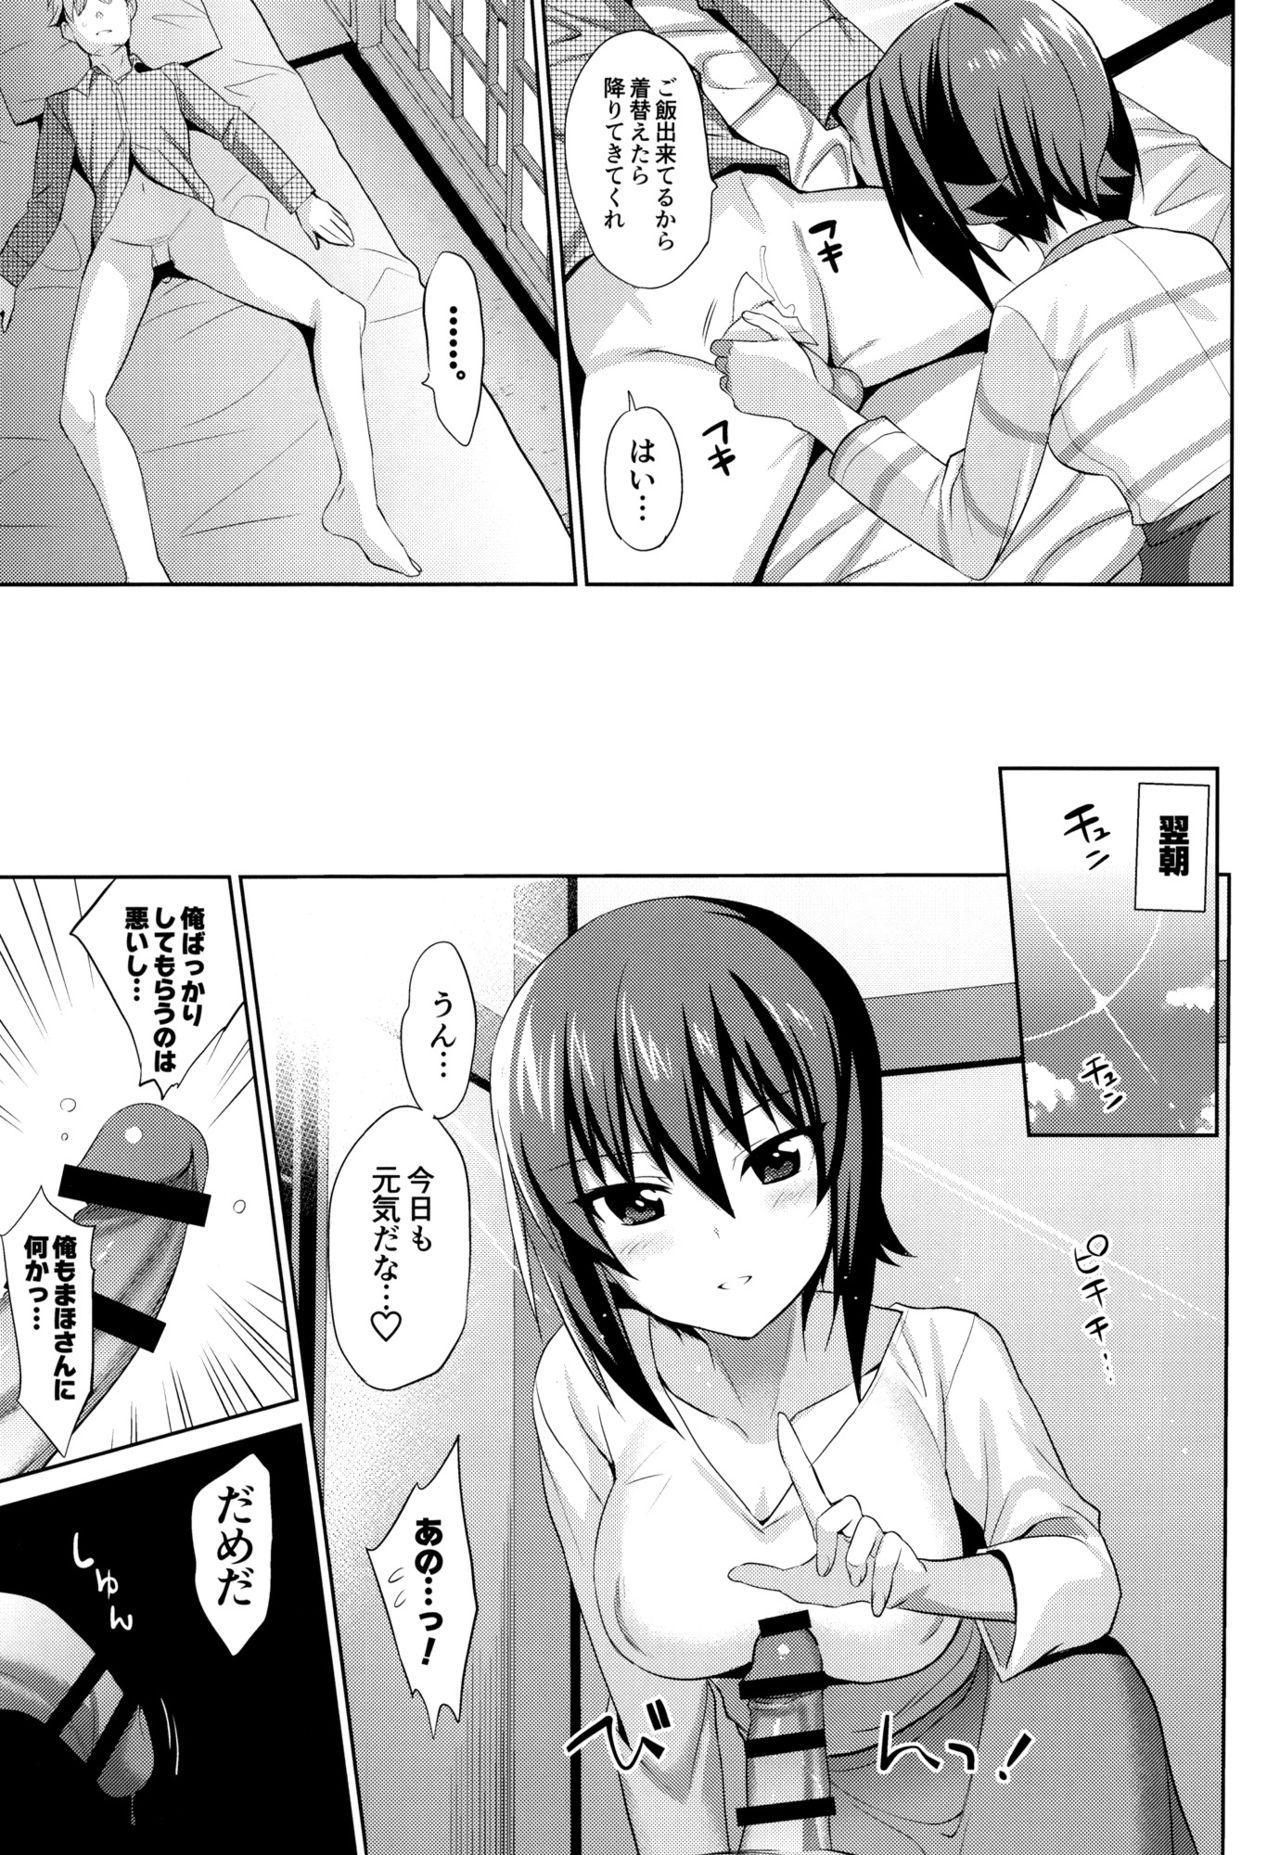 Strap On LET ME LOVE YOU TOO - Girls und panzer Girl Get Fuck - Page 10